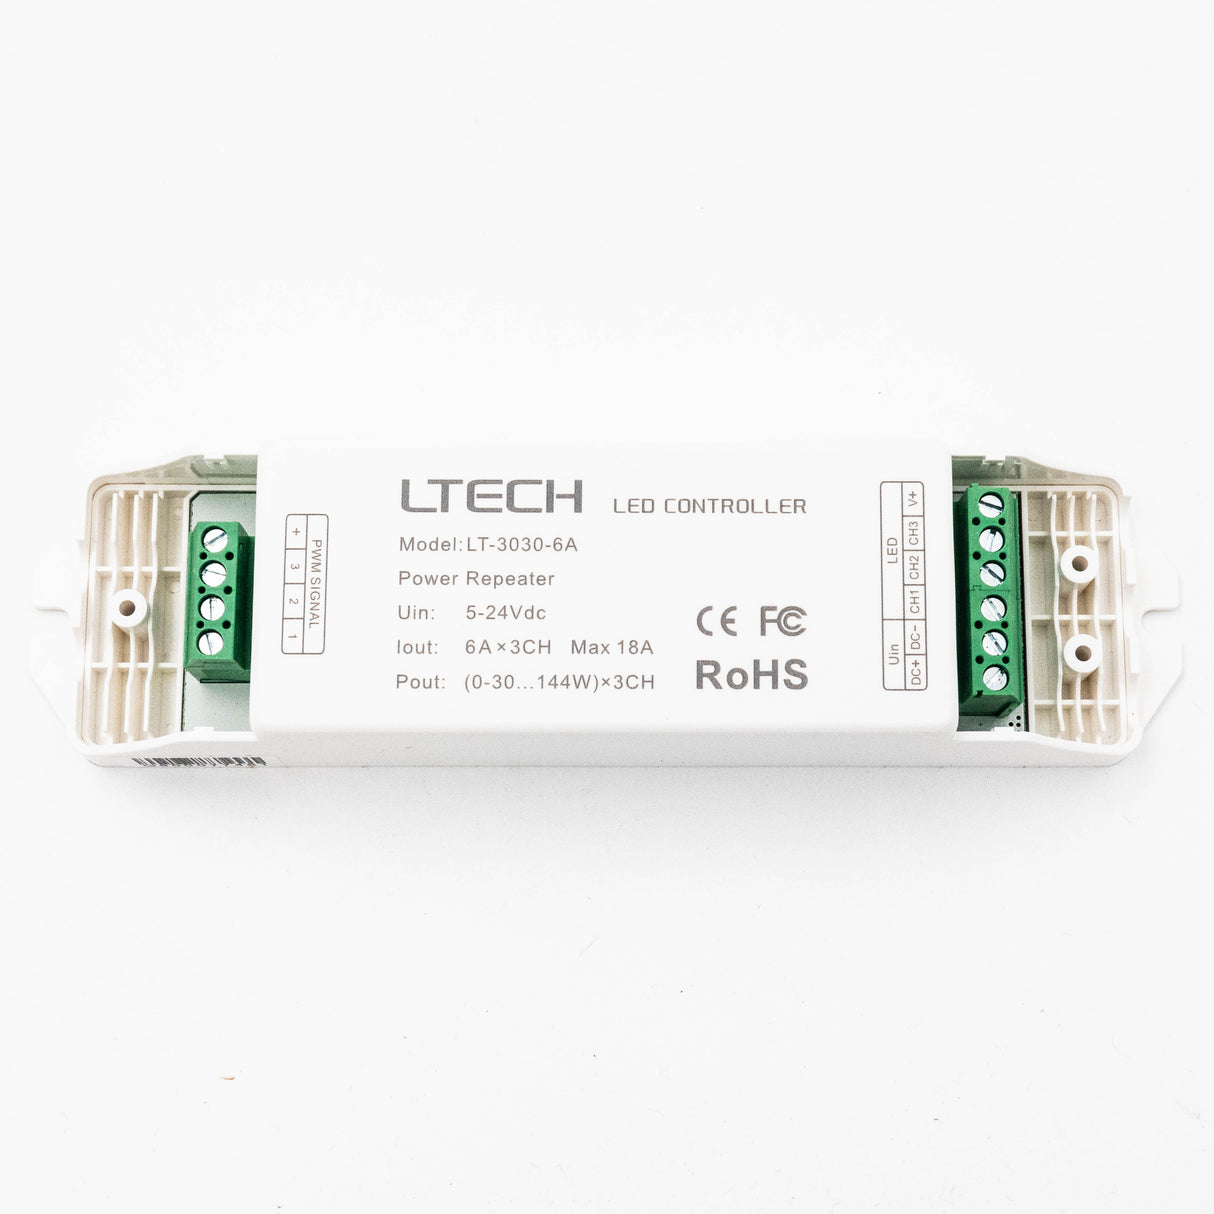 Ltech LT-3030-6A PWM Constant Voltage Repeater - RGB - PHOTO 4